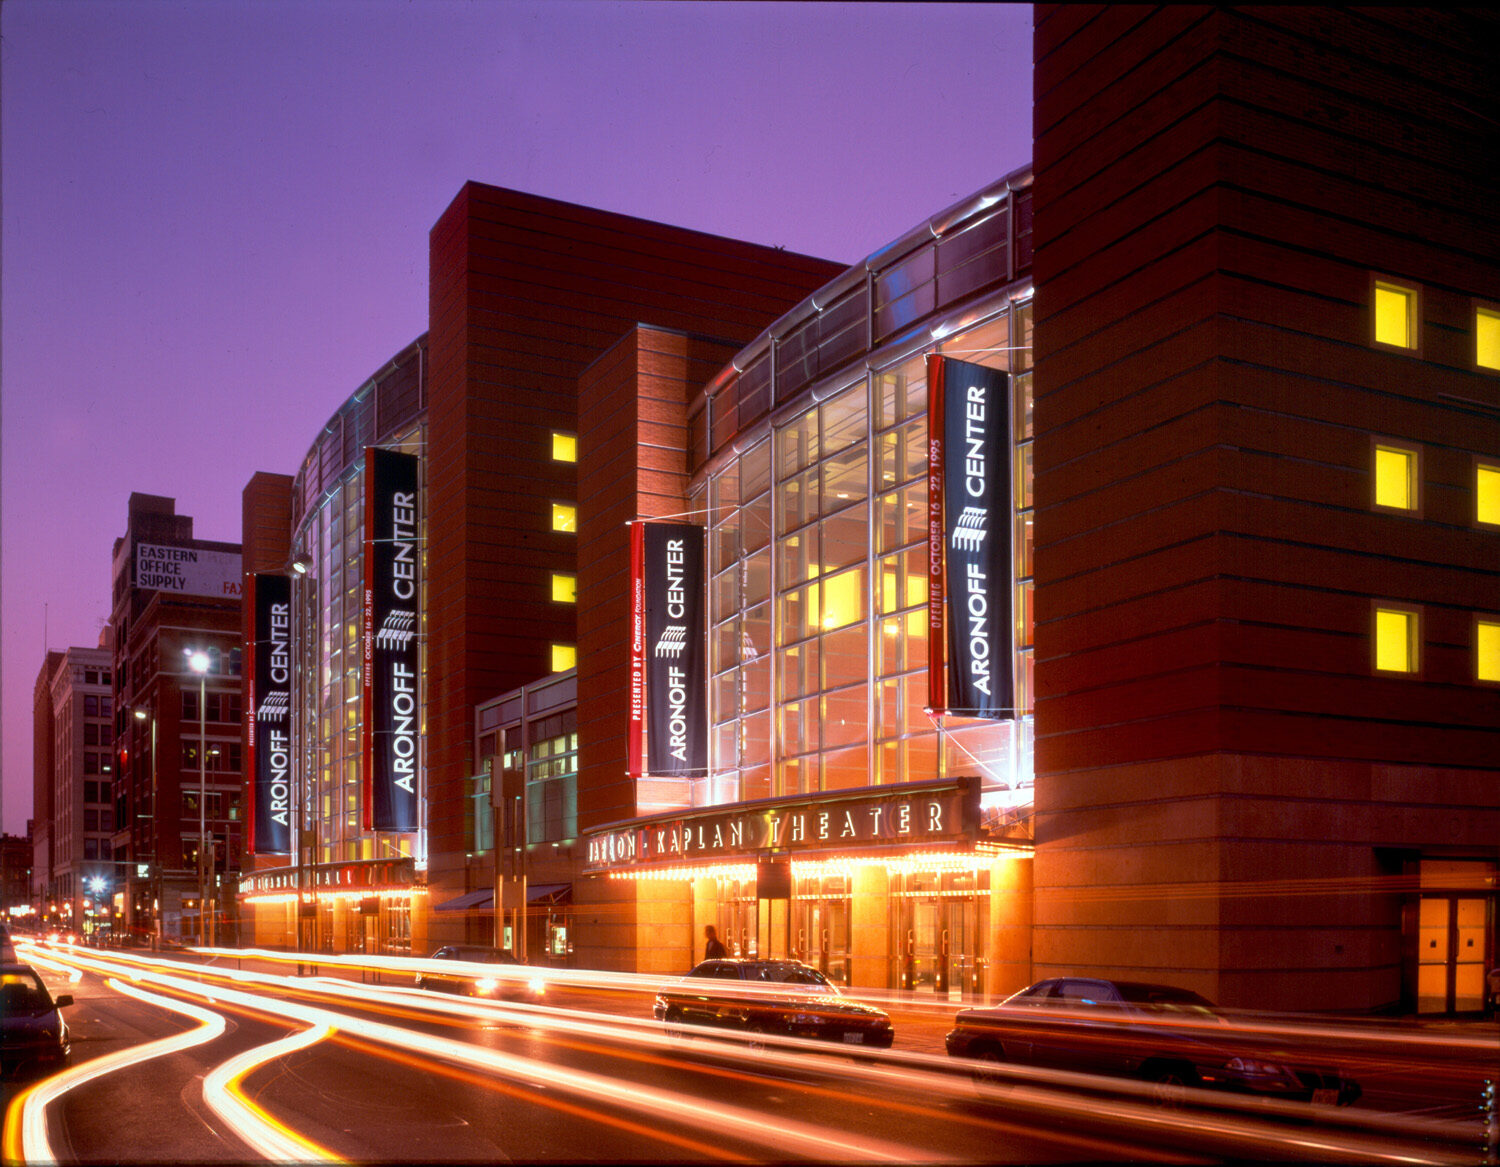 Aronoff Center for The Arts